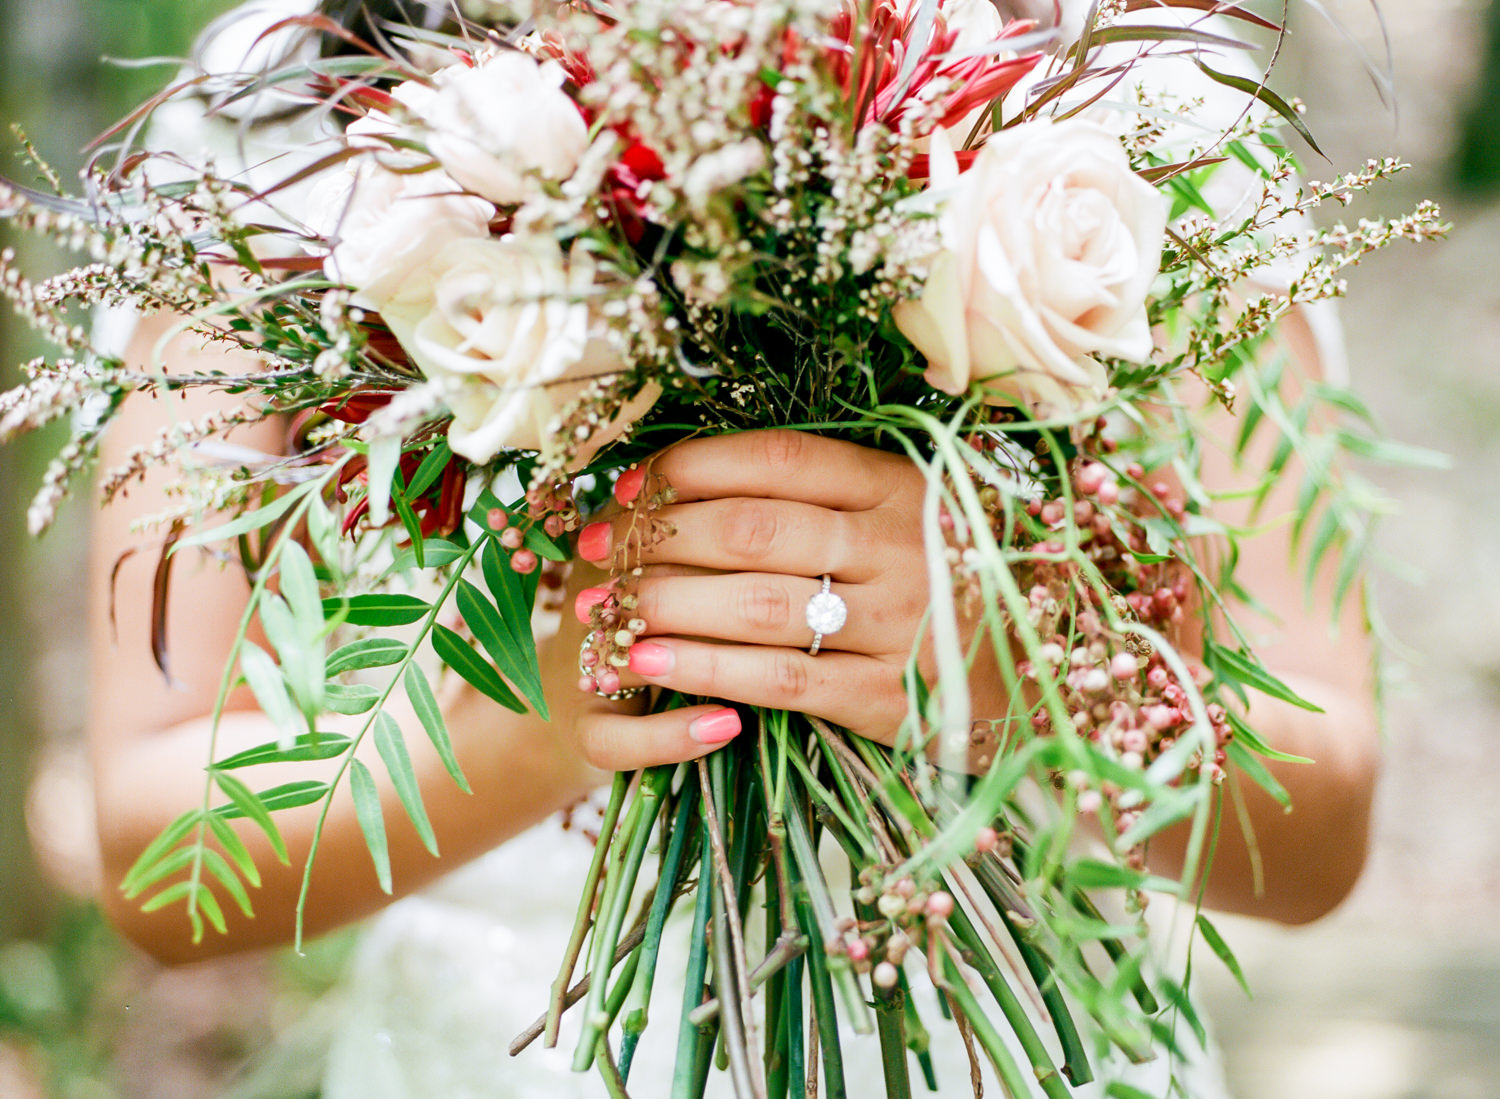 Farm Girl Florist, bride with pink nails and diamond ring holding rustic rose bouquet, Erica Robnett Photography